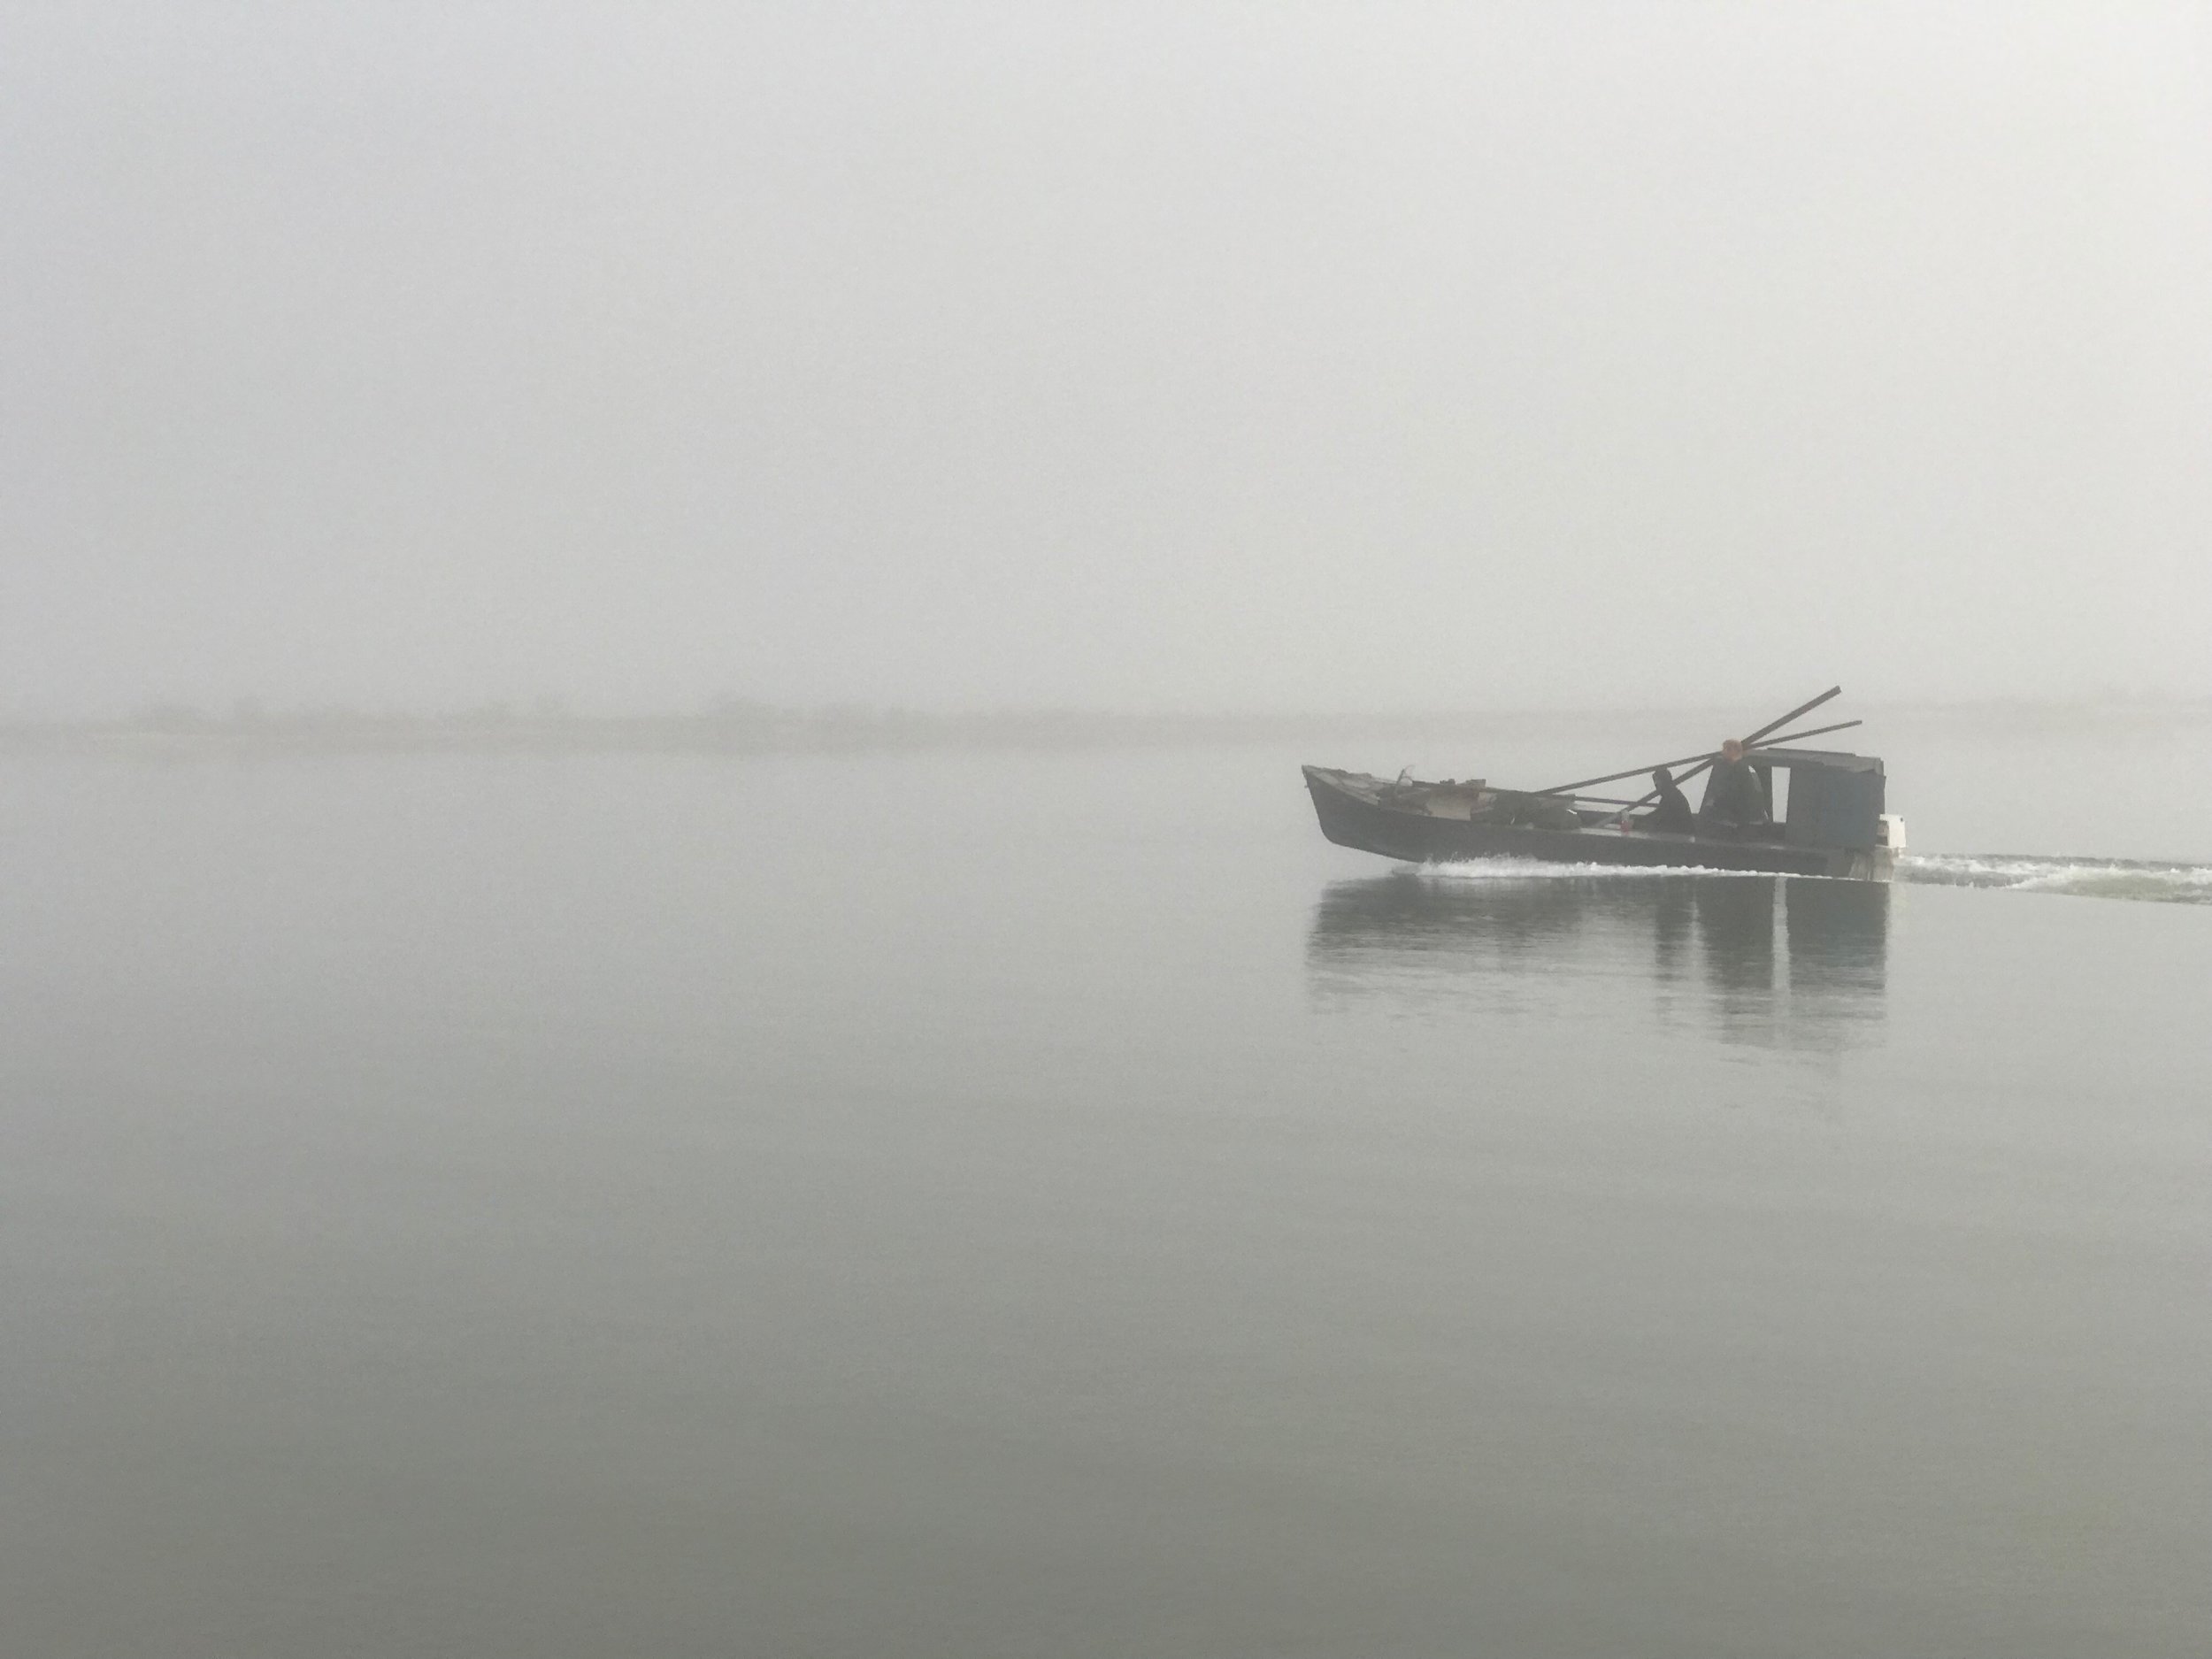  An oyster boat returns to foggy Eastpoint, Fla., after a long day     